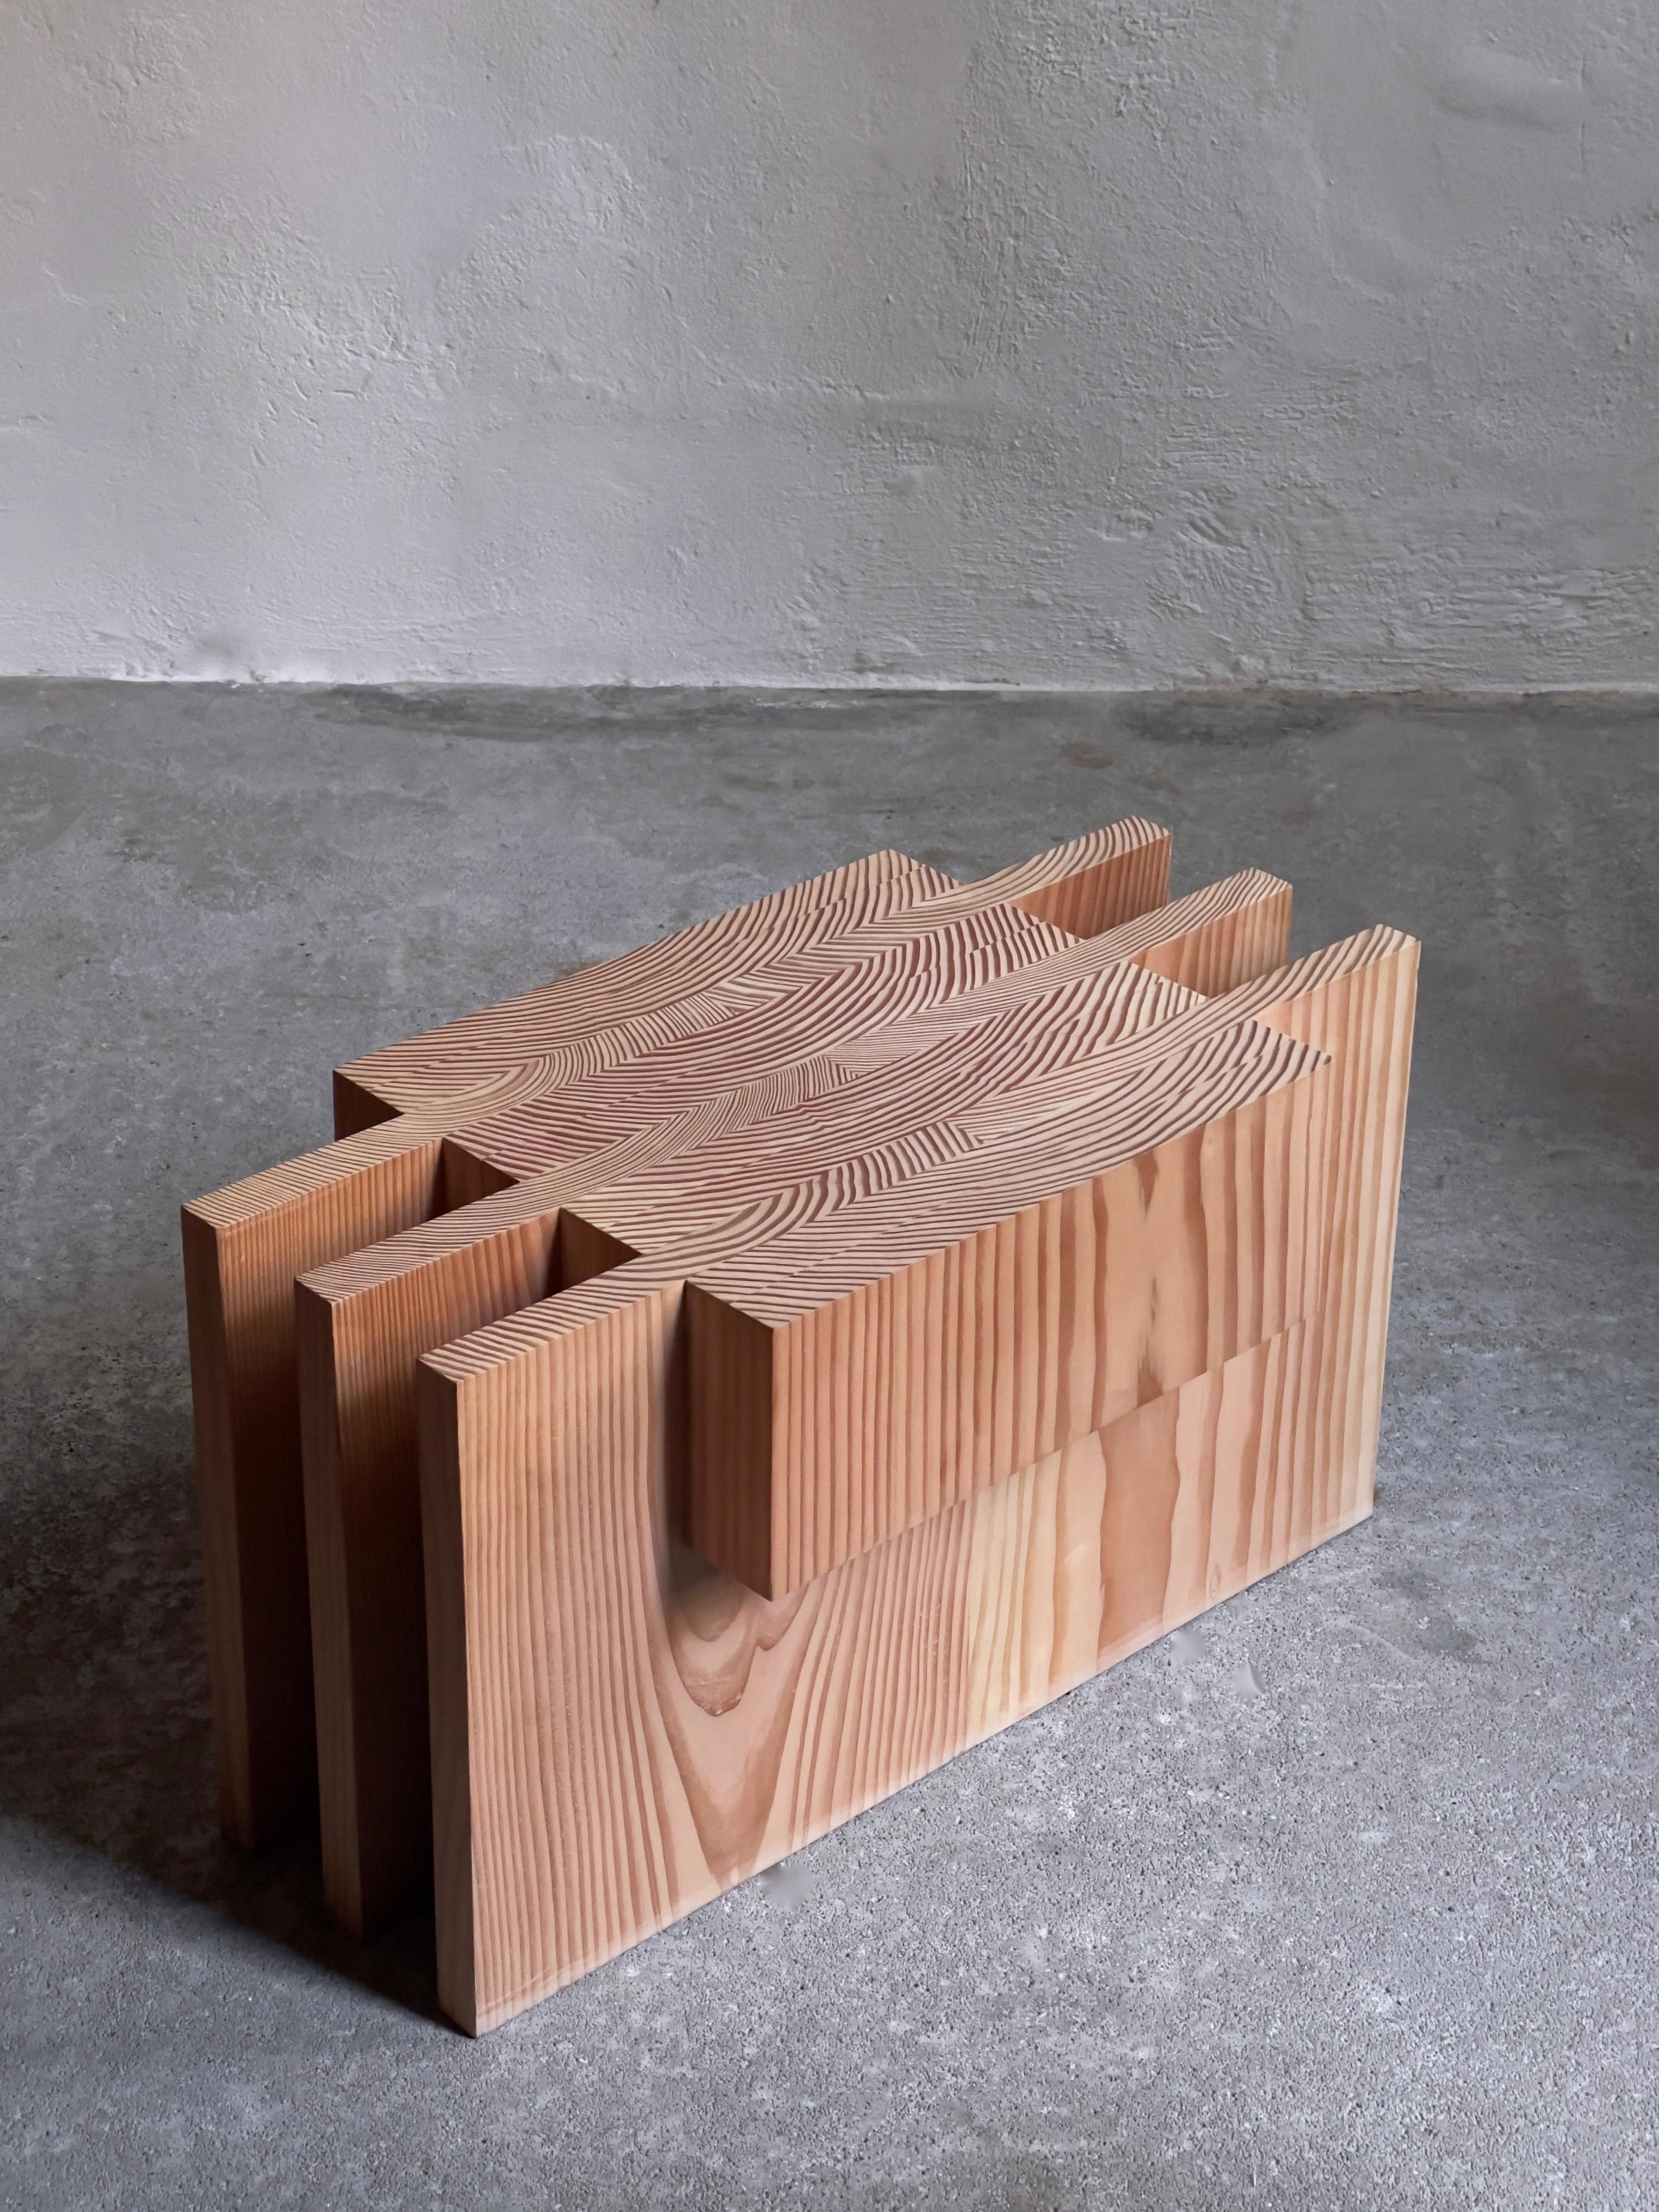 Kinetic Contemporary object Stool Table Made Entirely from Industrial Pine Wood Offcuts For Sale